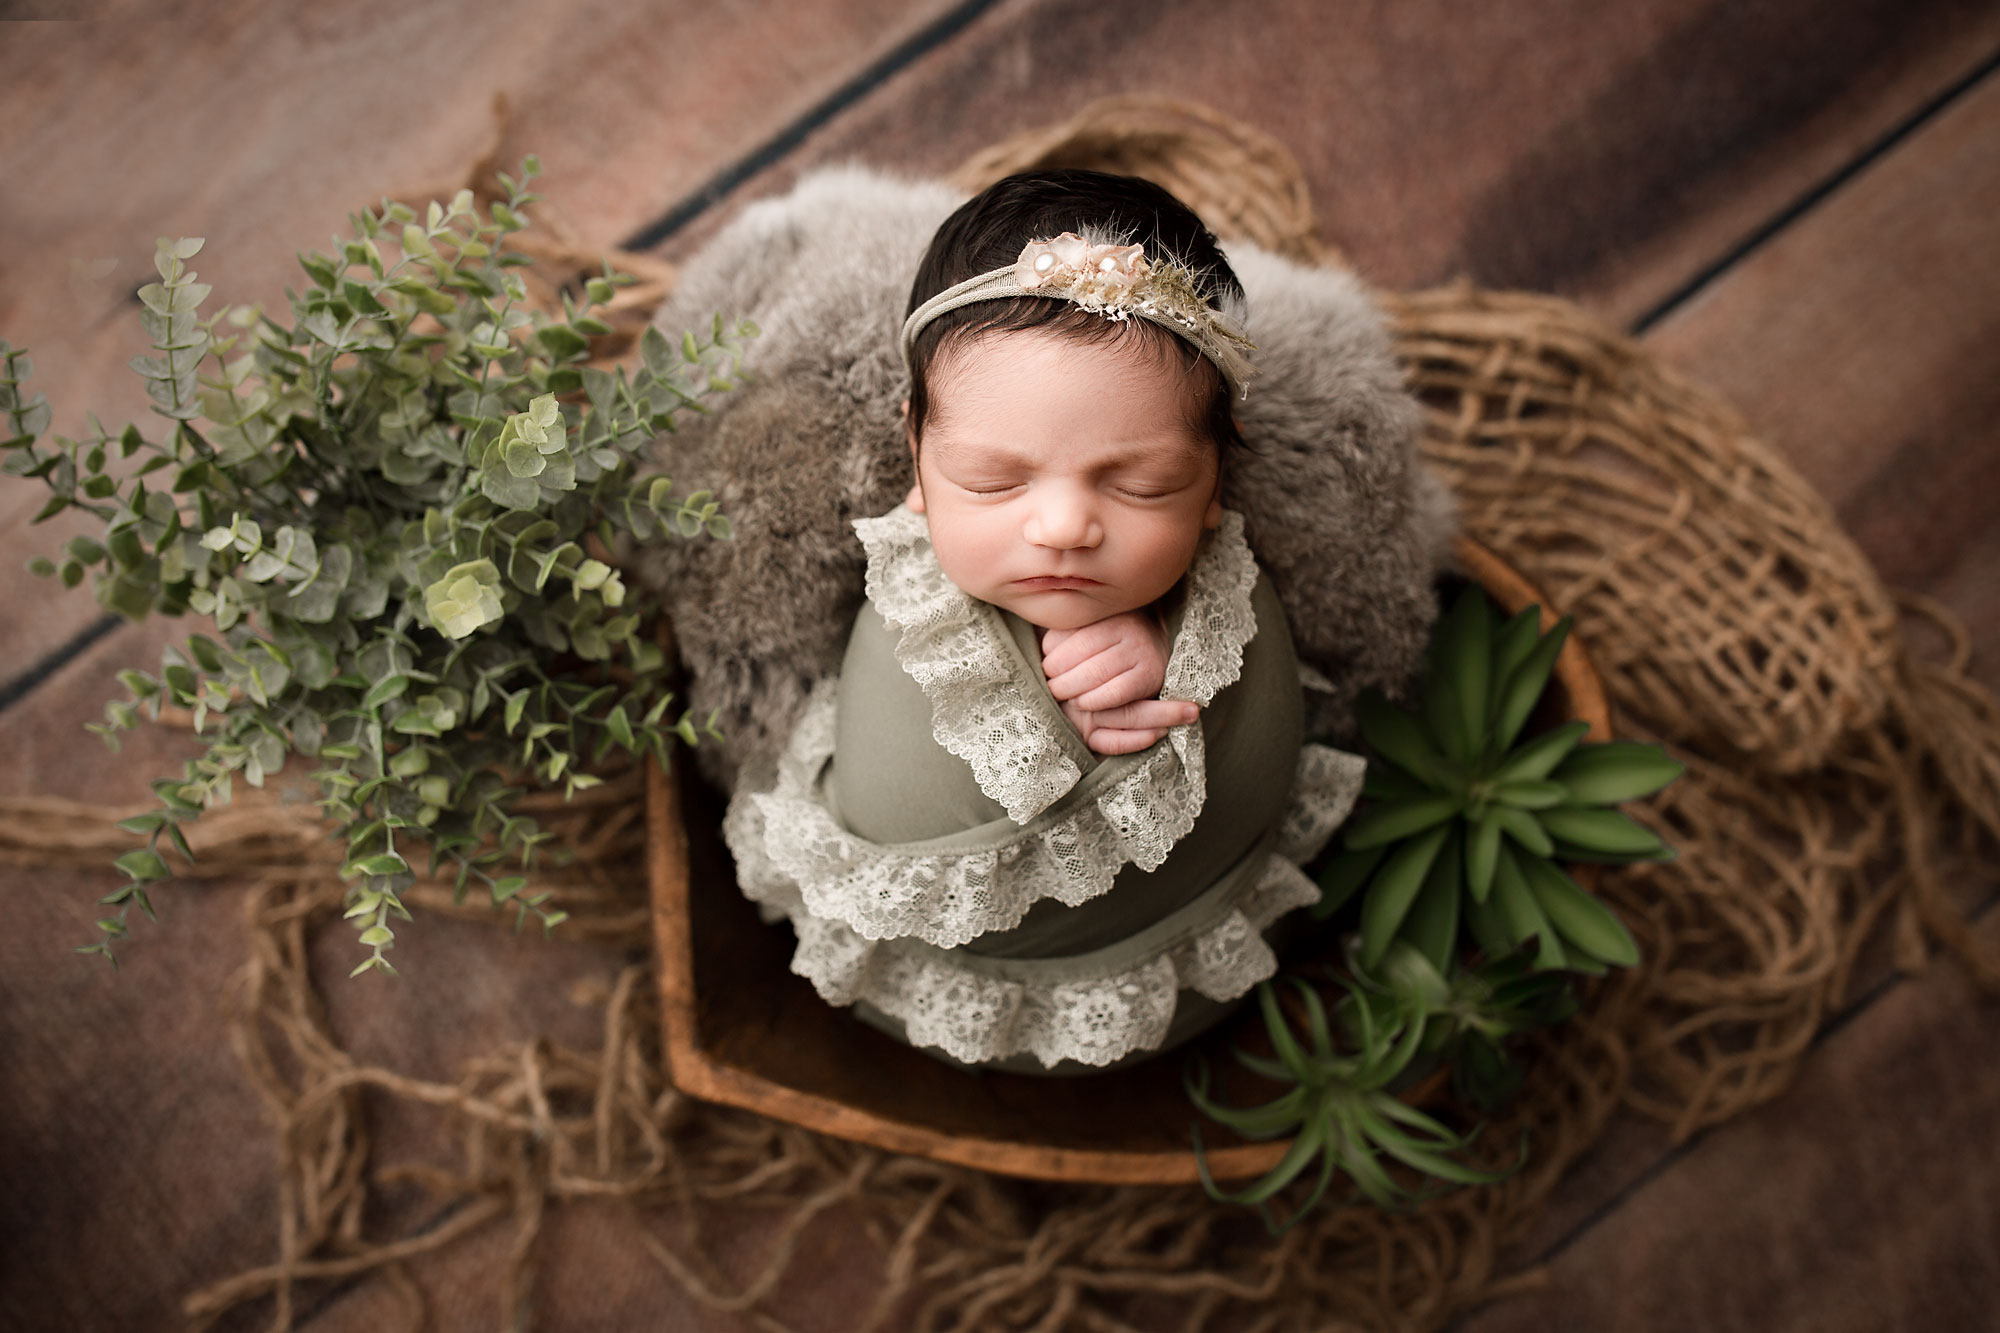 newborn baby photo session near morris county new jersey, baby girl in wooden heart bowl with plants